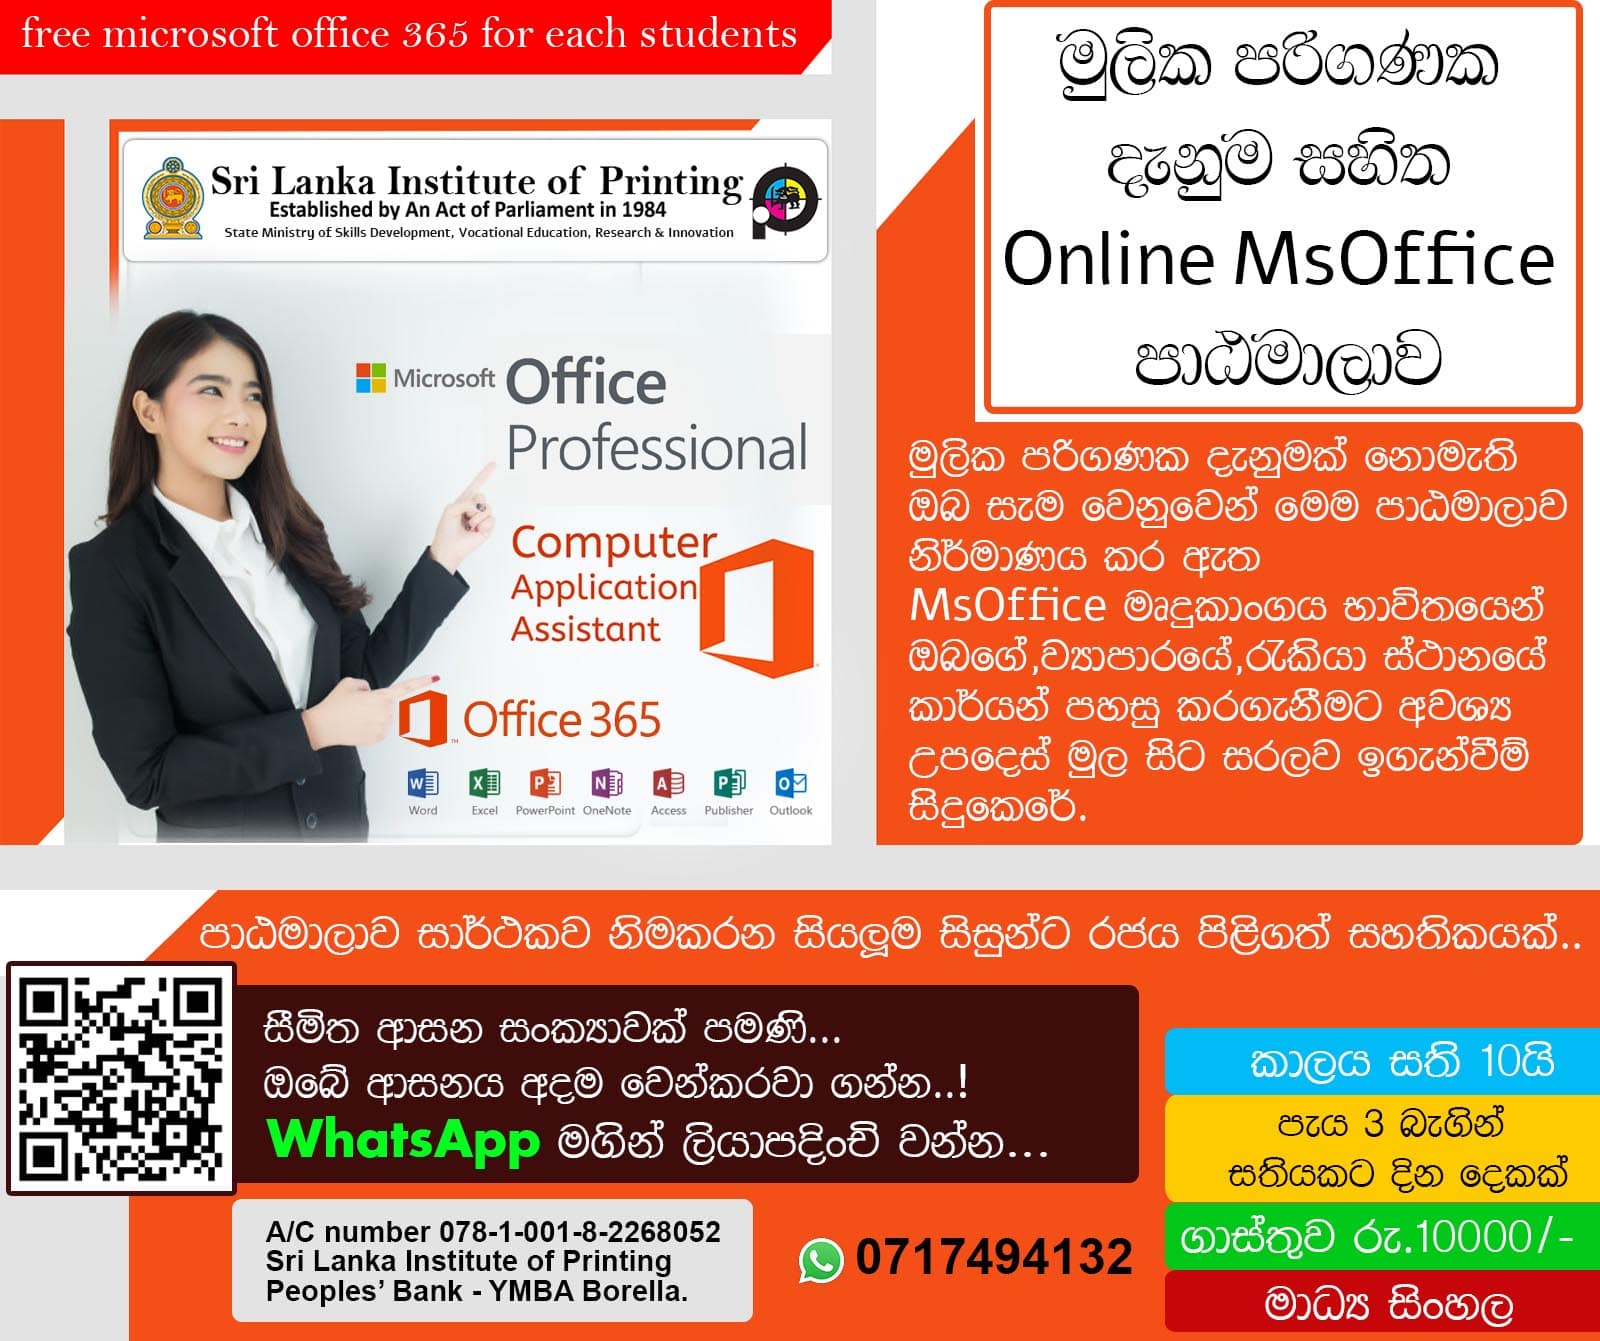 MS Office Online Course - Sri Lanka Institute of Printing (SLIOP) Course Details